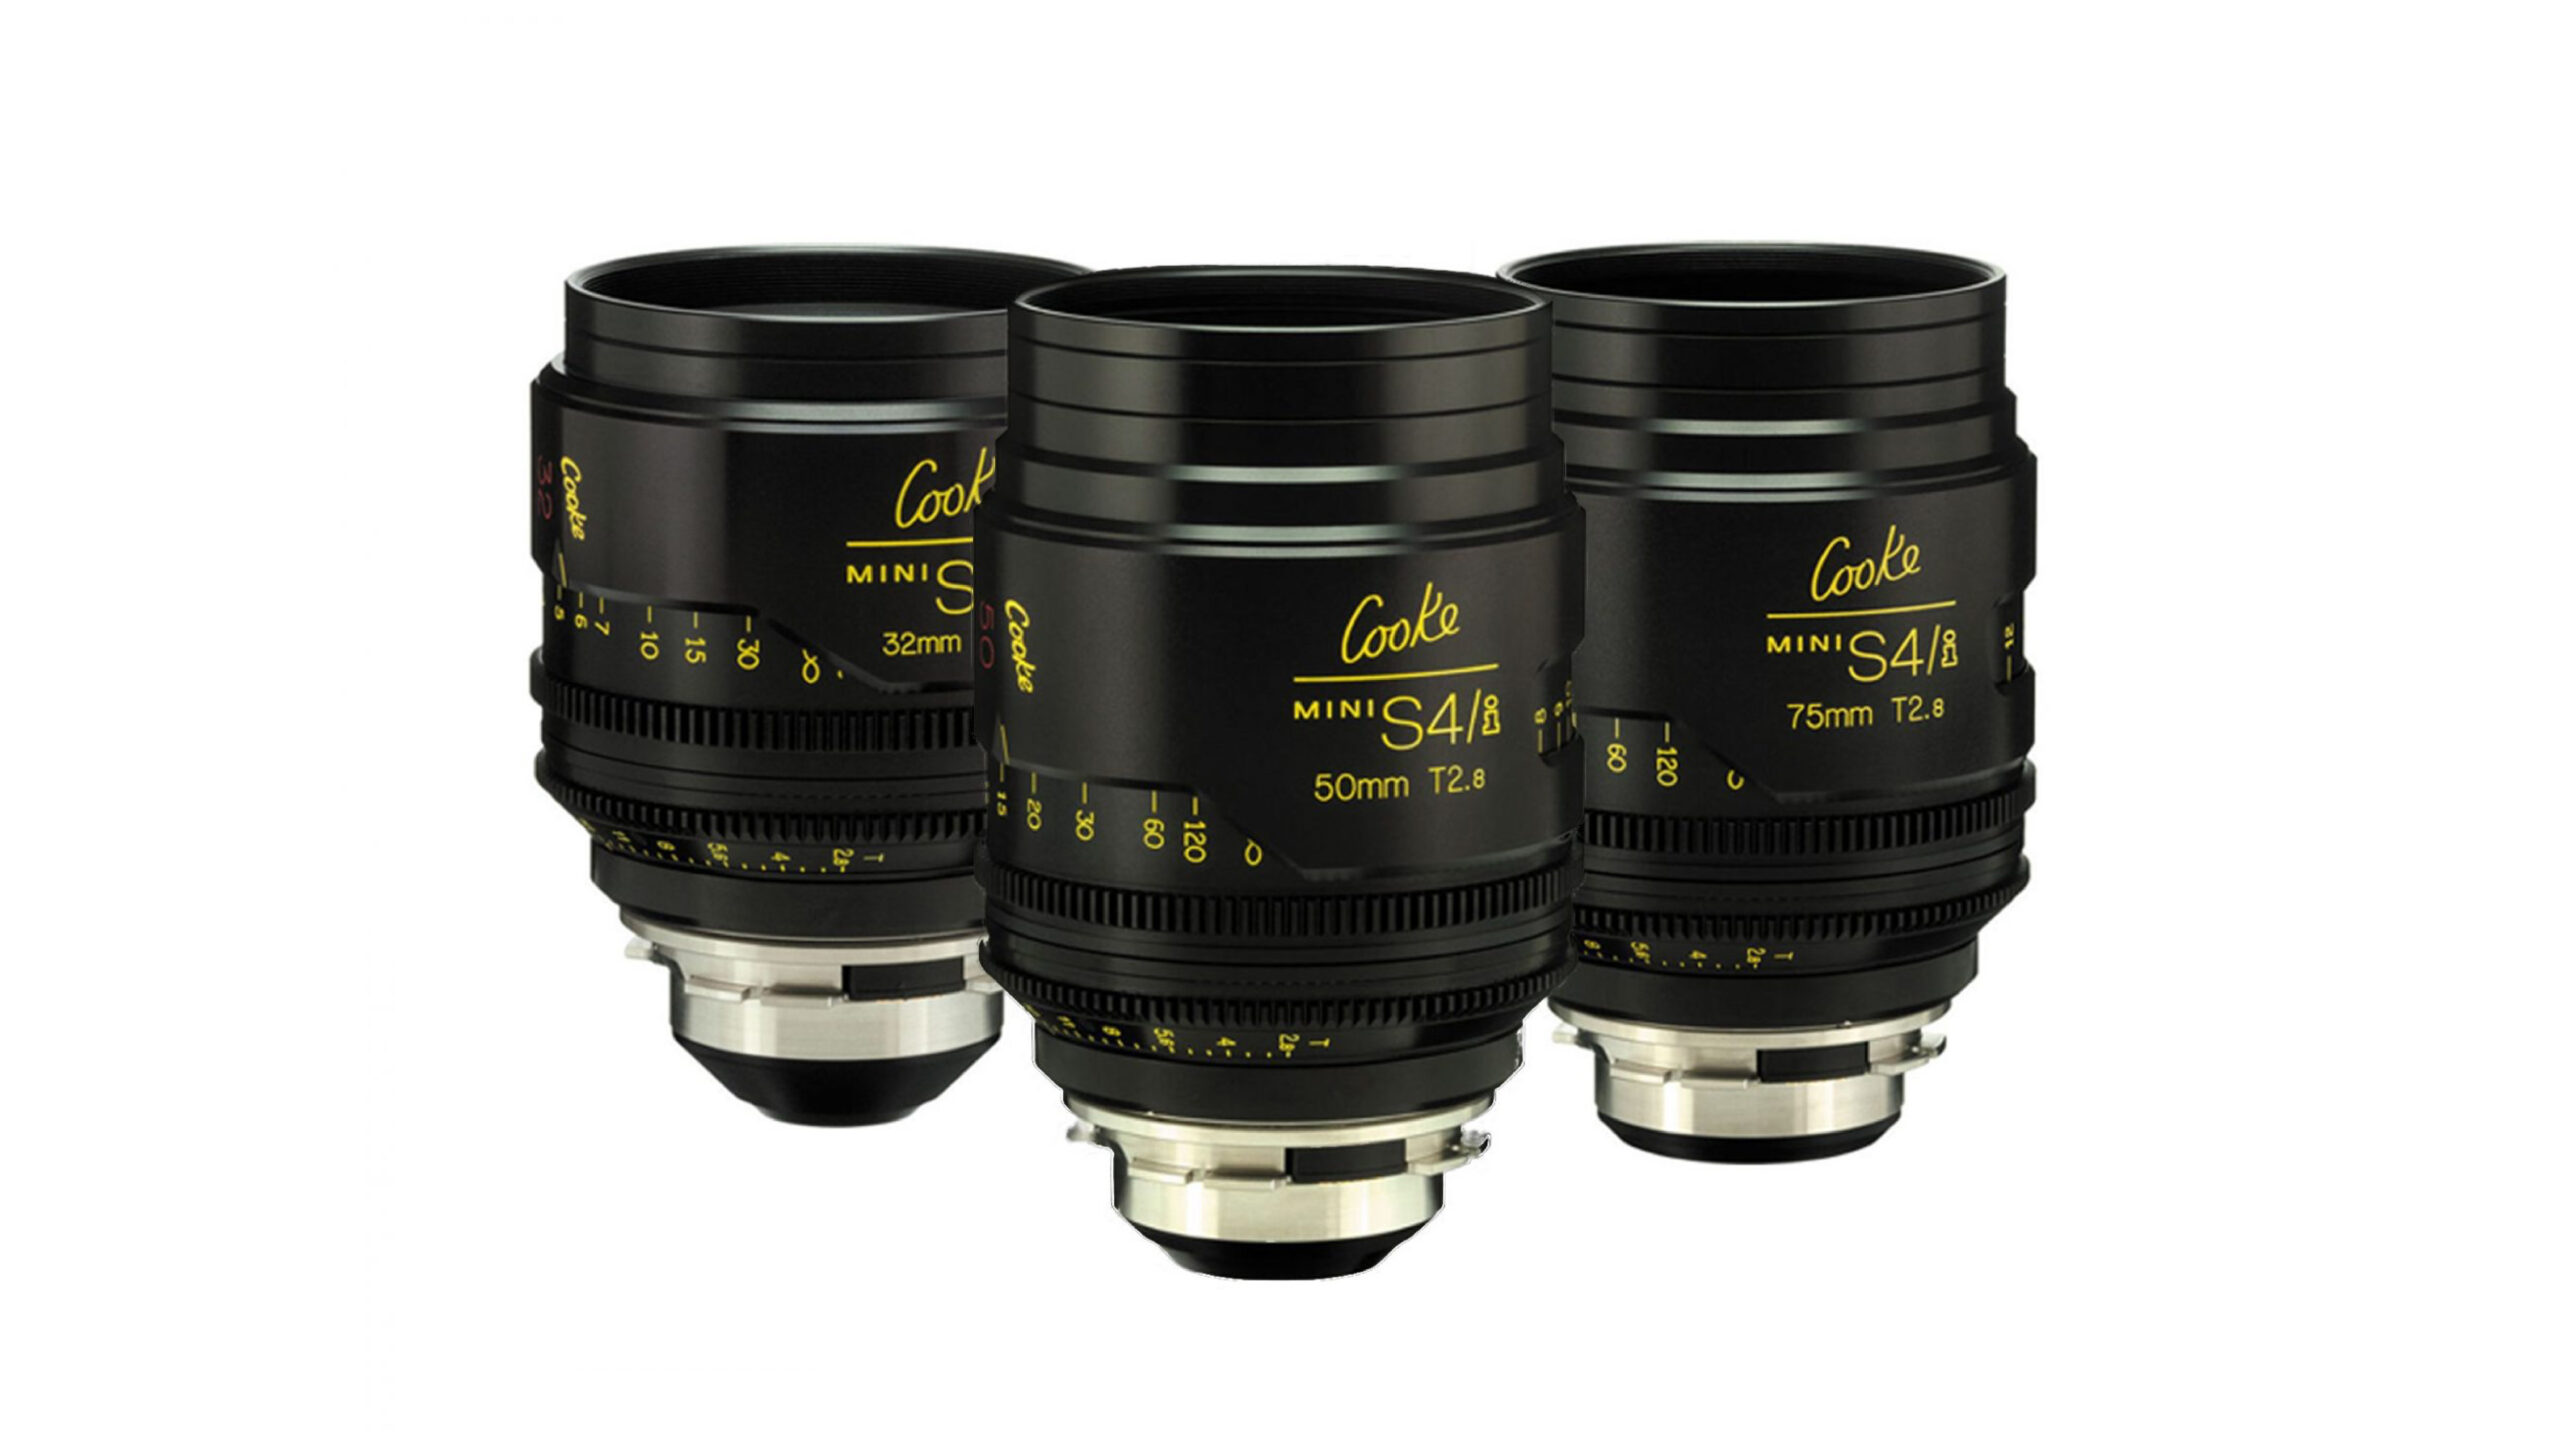 cooke s4i mini lens set 35mm 50mm 75mm for hire 01 scaled 1